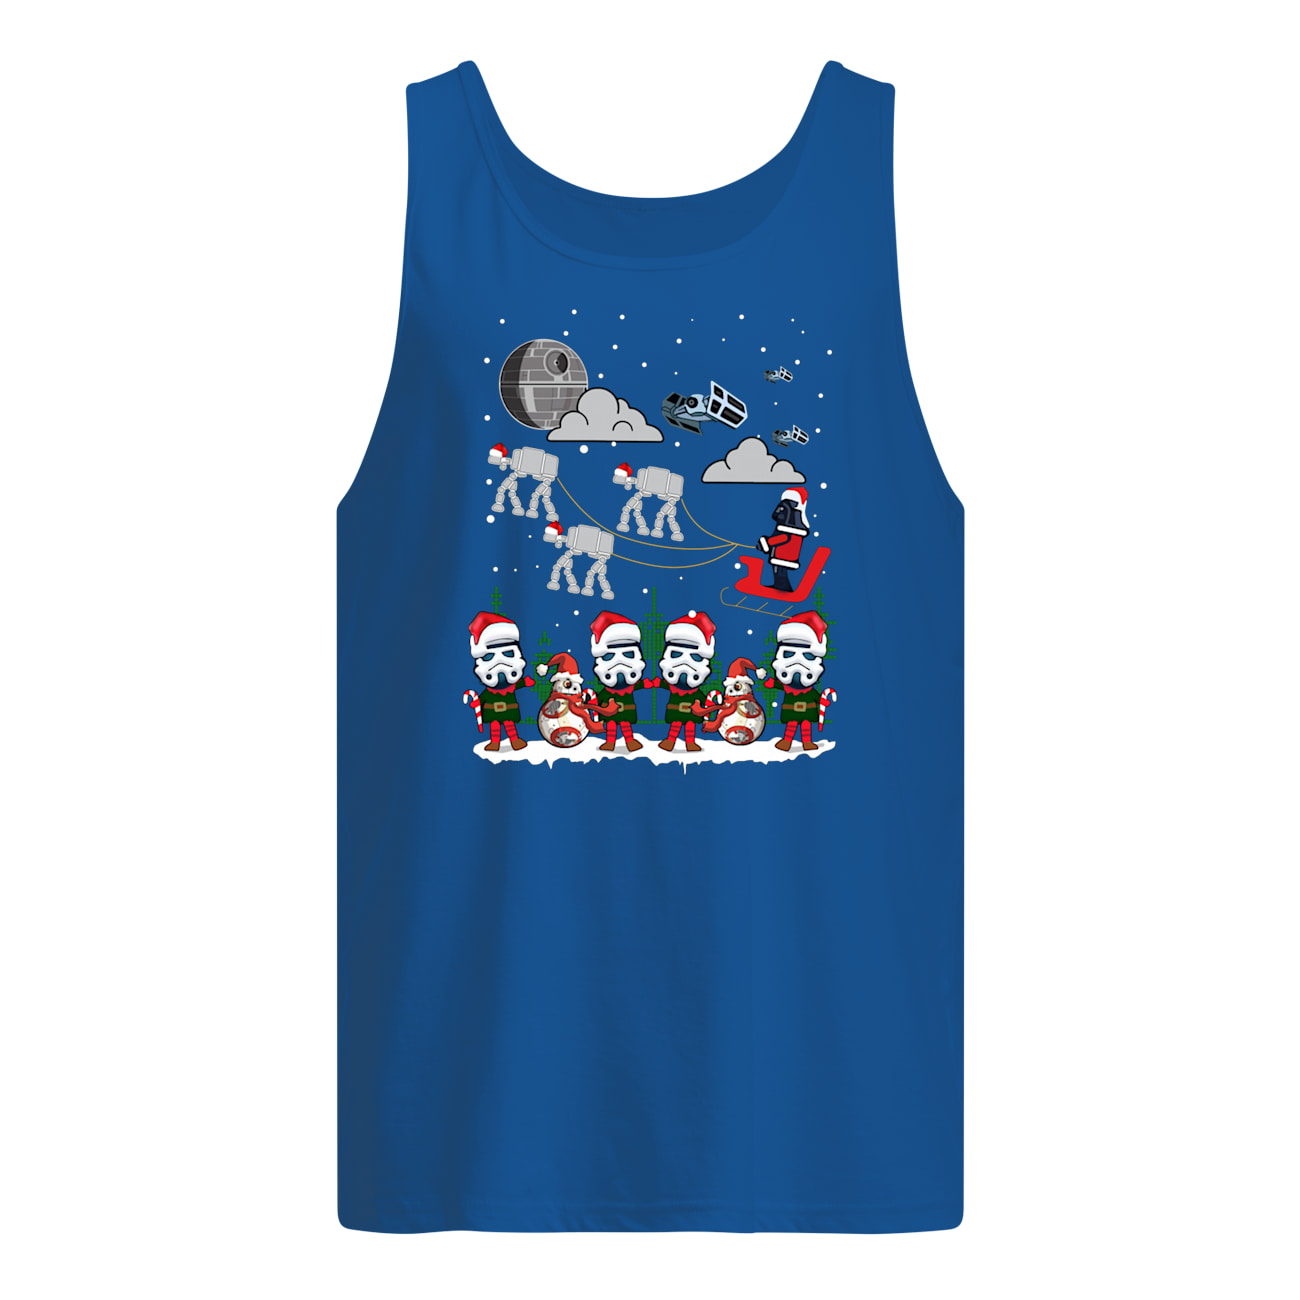 Star wars darth vader and stormtroopers sleigh deathstar christmas tank top